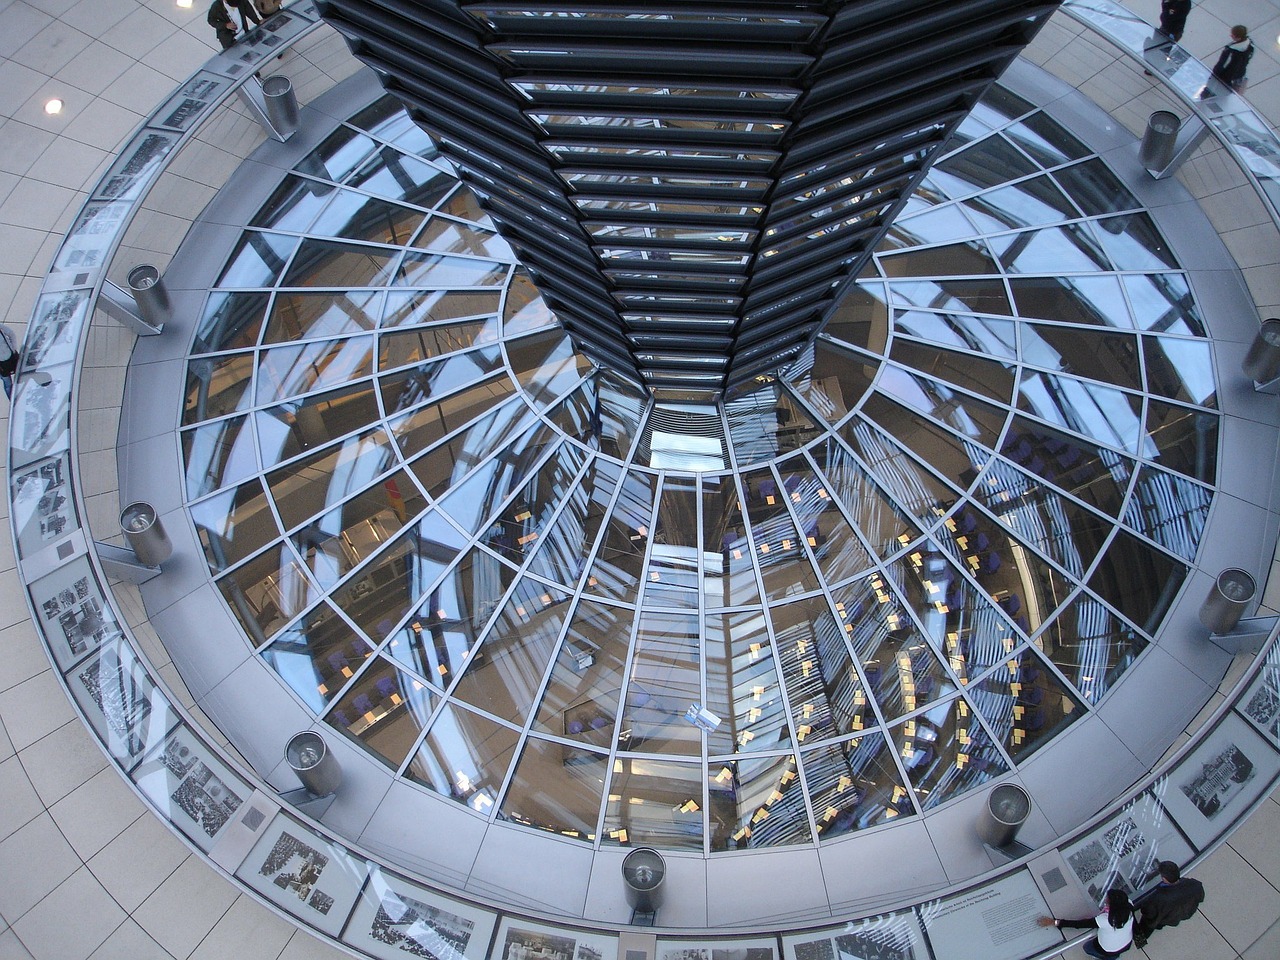 The Reichstag dome which is a glass dome constructed on top of the rebuilt Reichstag building in Berlin, Germany.